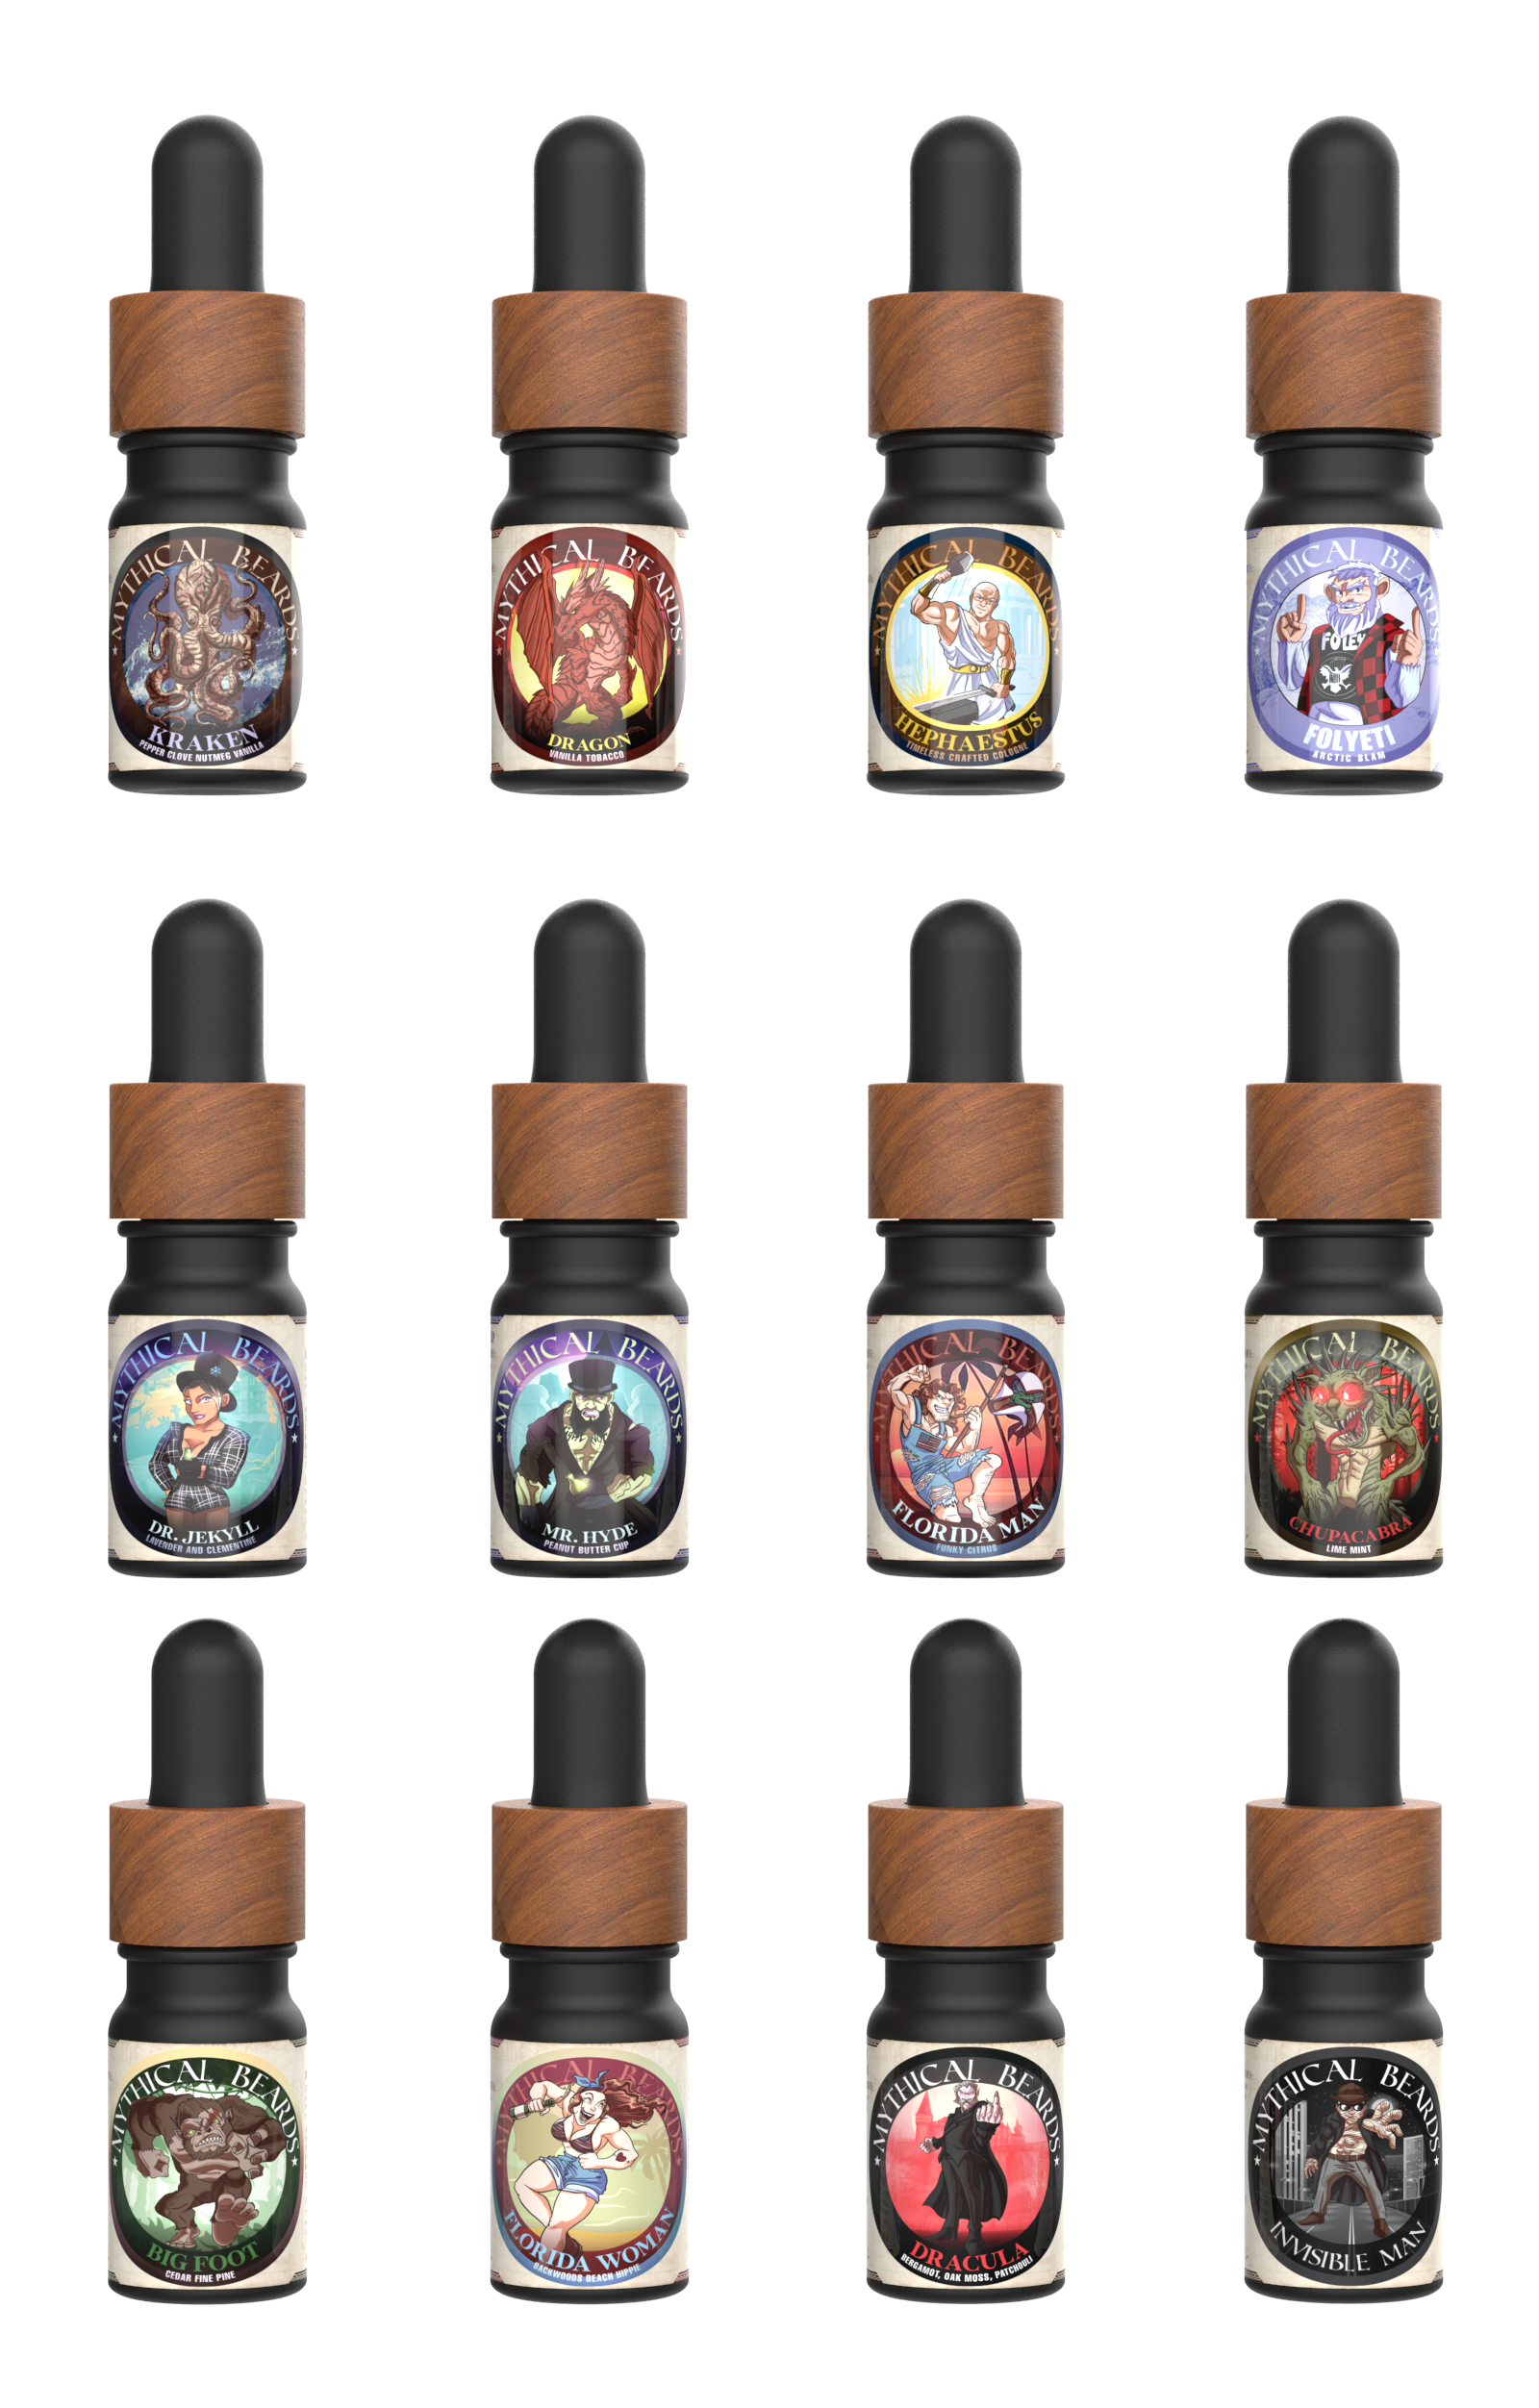 Legendary Sample Pack - All 10 Mainline Scents + 2 Seasonal or Limited Scents